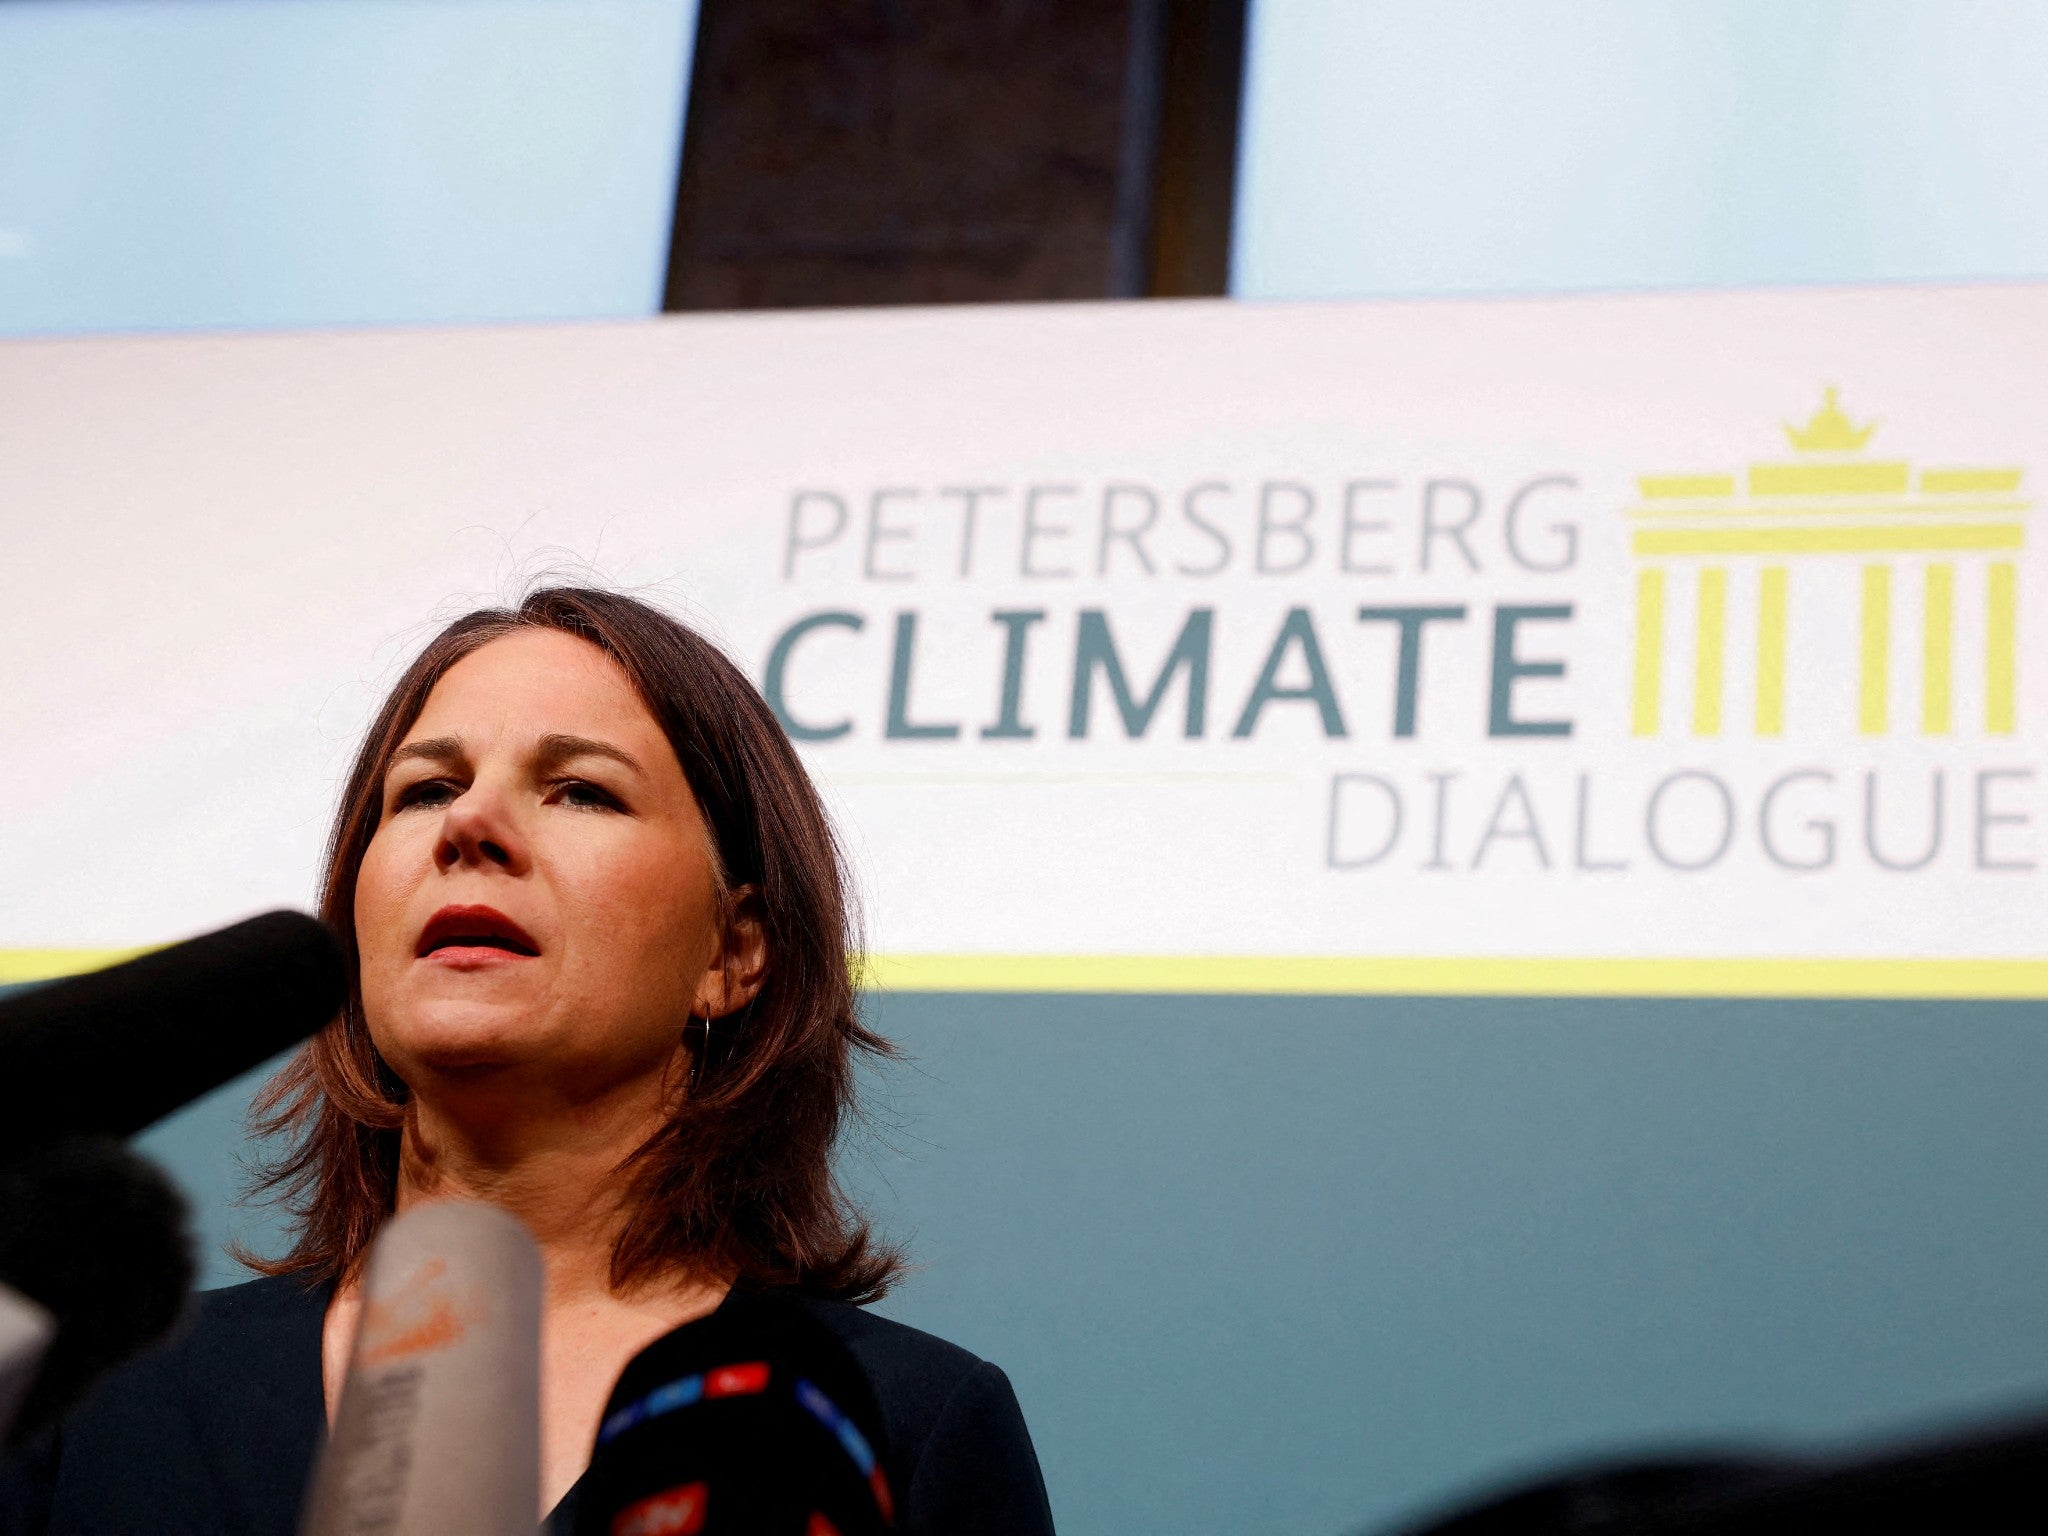 Germany’s foreign minister, Annalena Baerbock, attends the Petersberg Climate Dialogue in Berlin